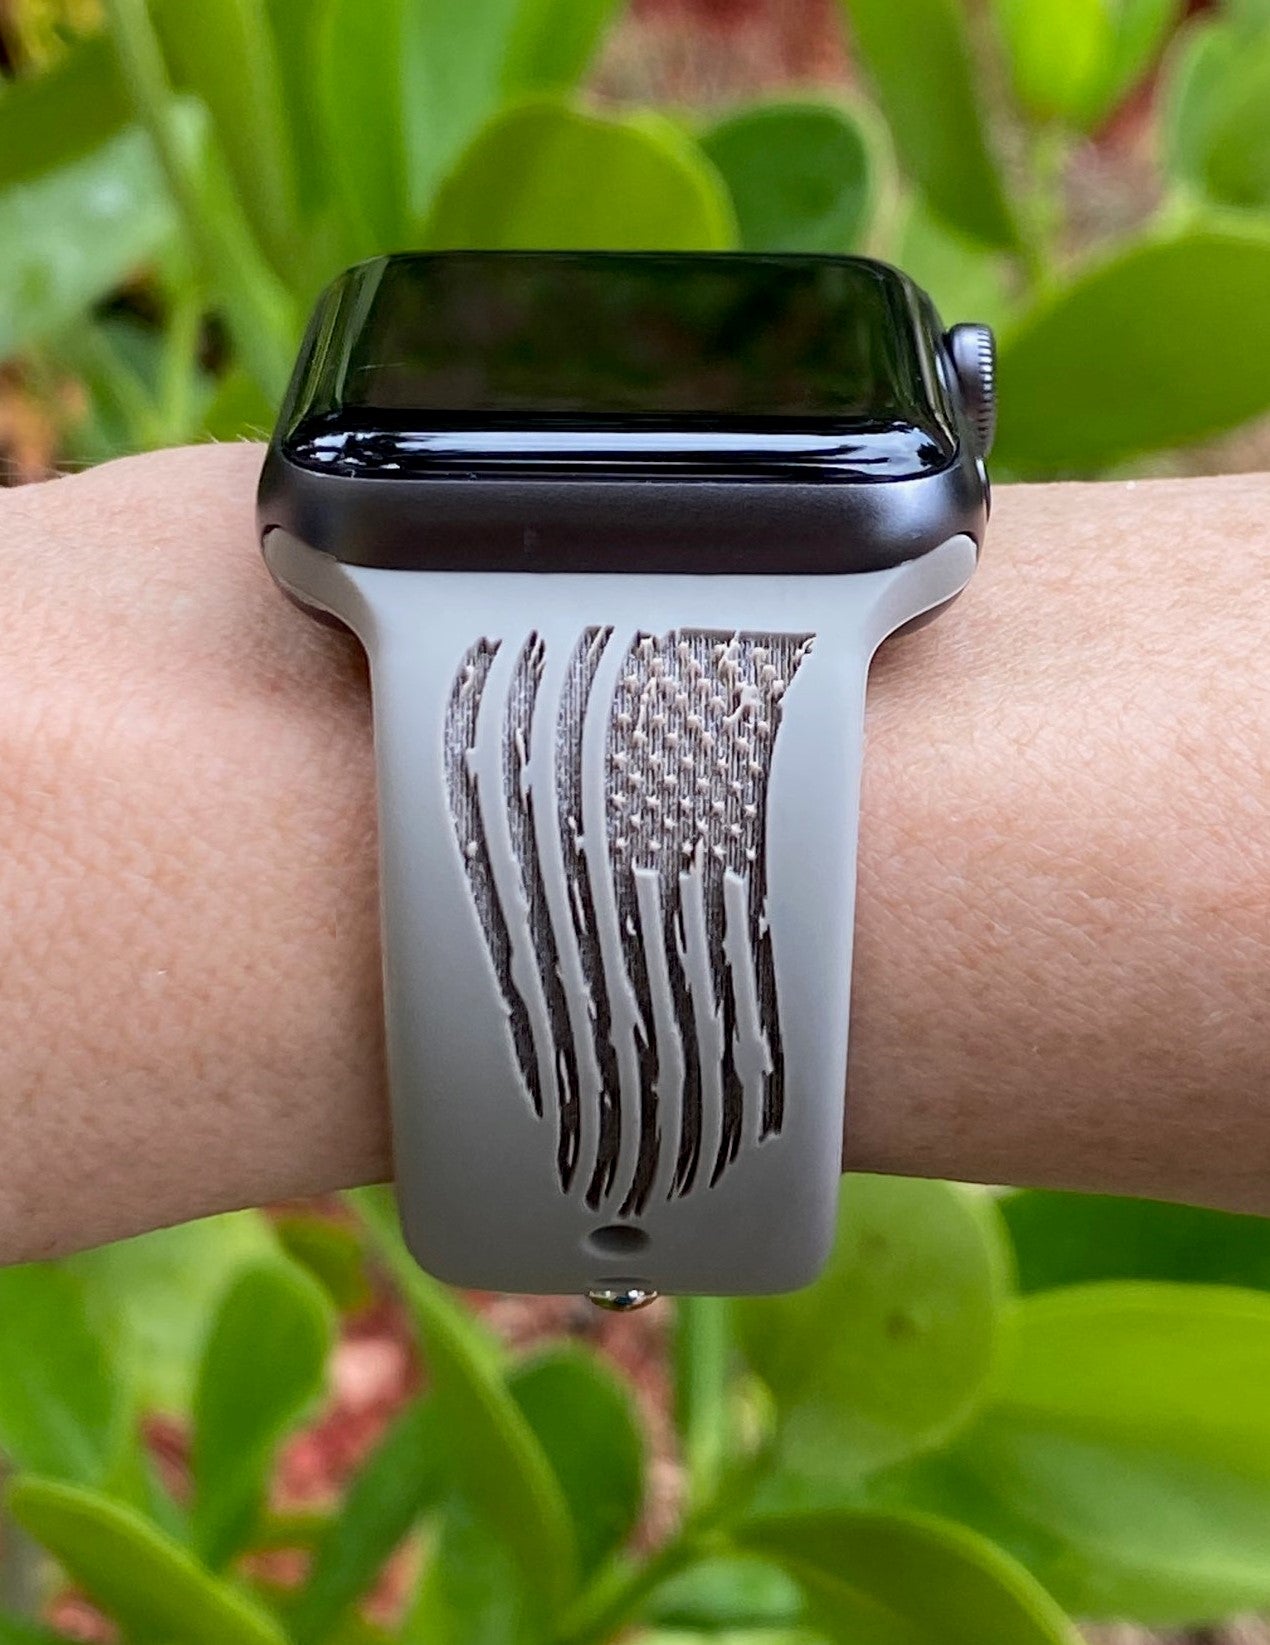 We the People Apple Band 